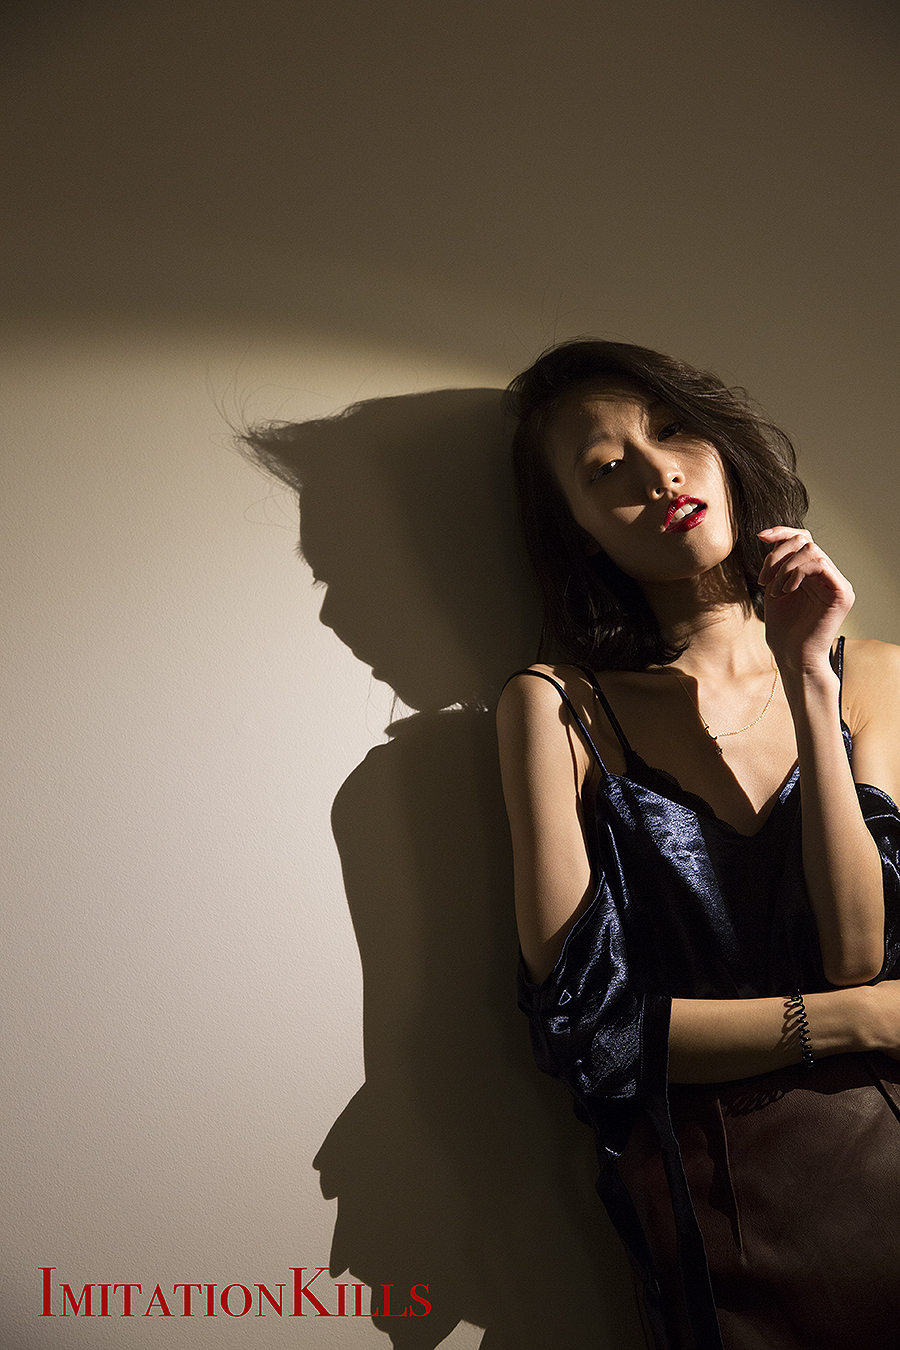 Linda_Ruan_Fashion_Photography_Ad_Campaign_Imitation_Kills_Clothes_Nightout_Style_Sexy_Subedued_Light_and_Shadow